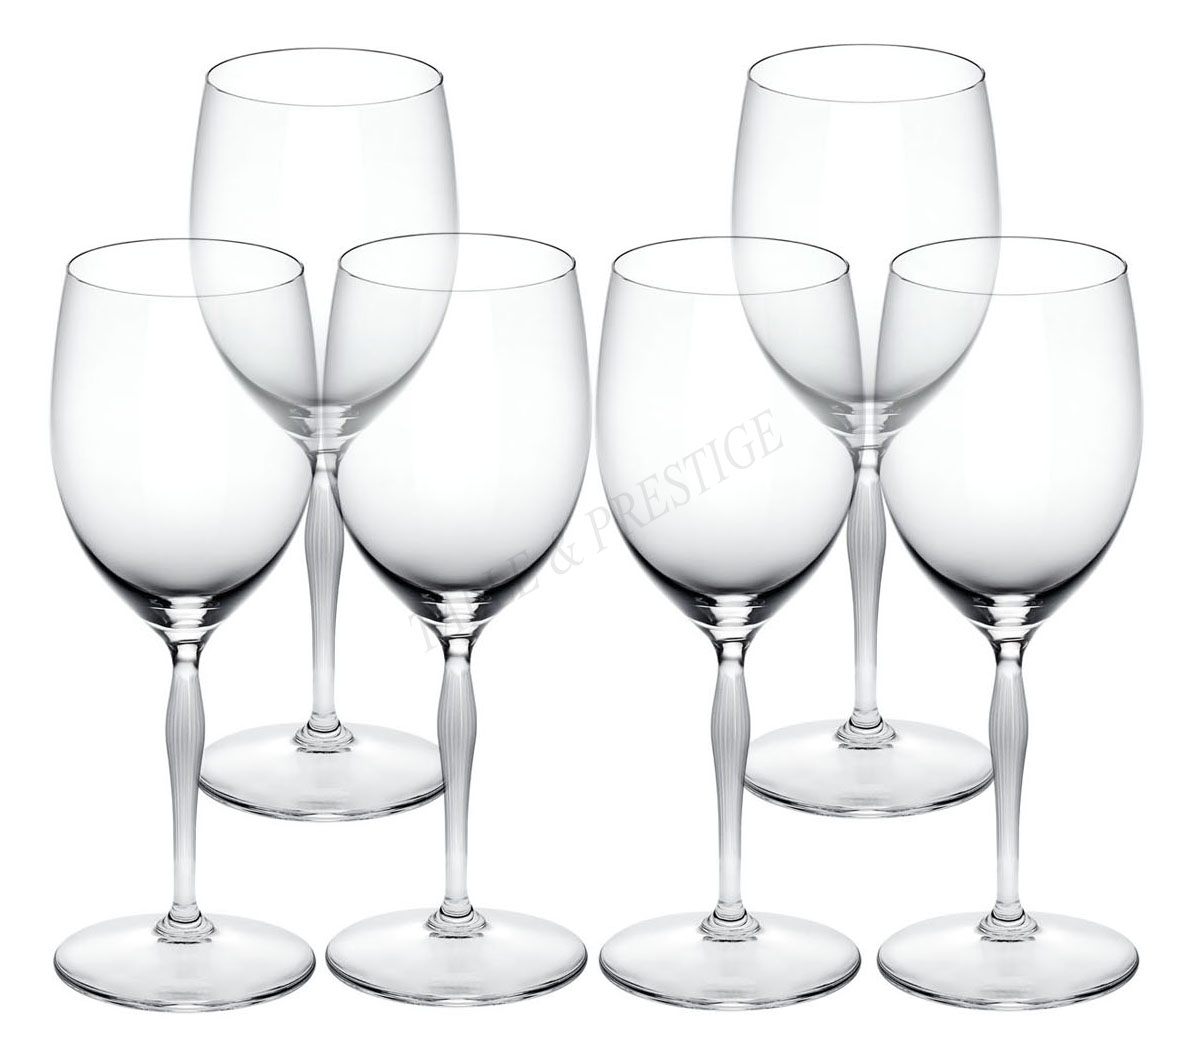 Water glass - set of 6 - Lalique